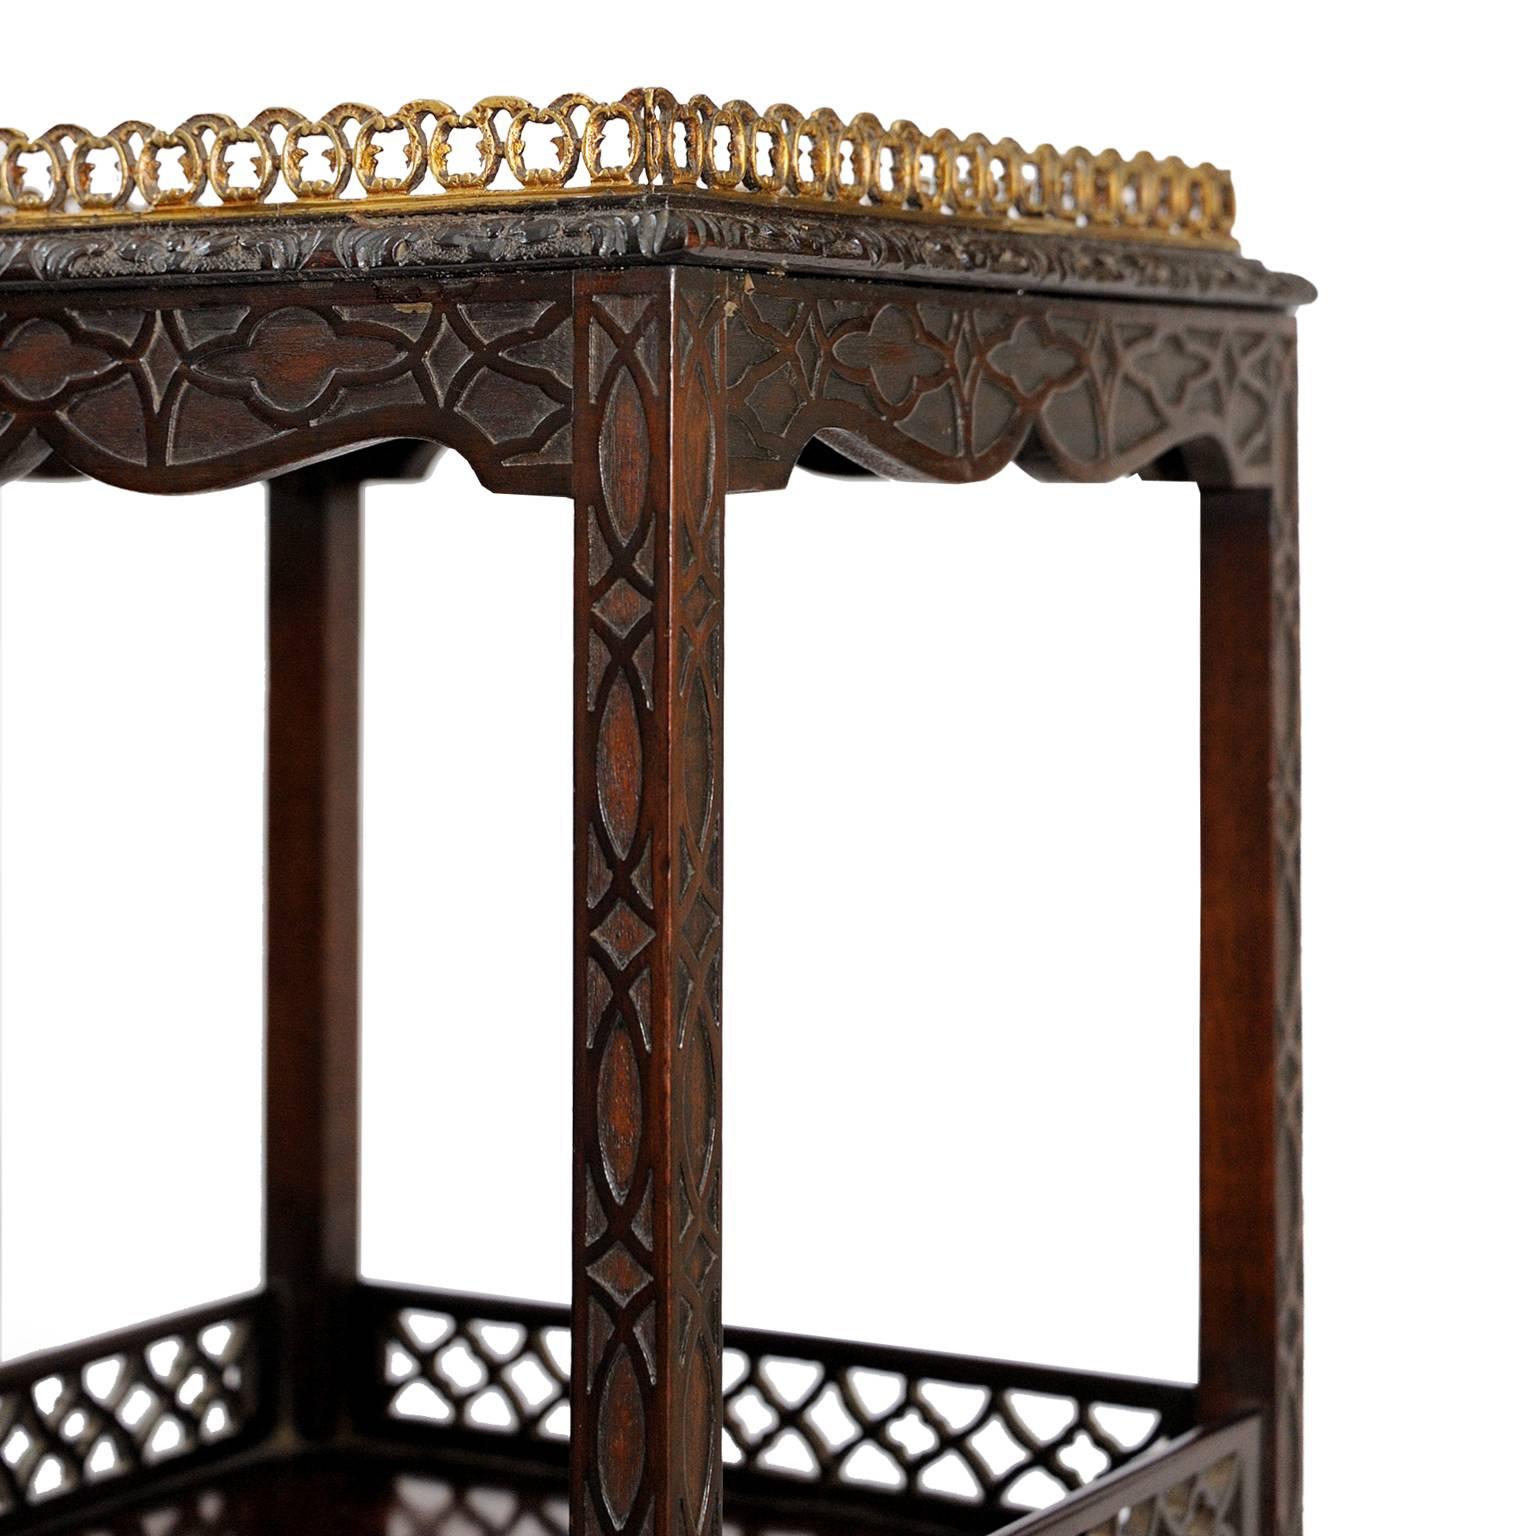 This is a very attractive 18th century George III stand, featuring later Chinese Chippendale style carving, made from mahogany and with a smart brass gallery, circa 1780.